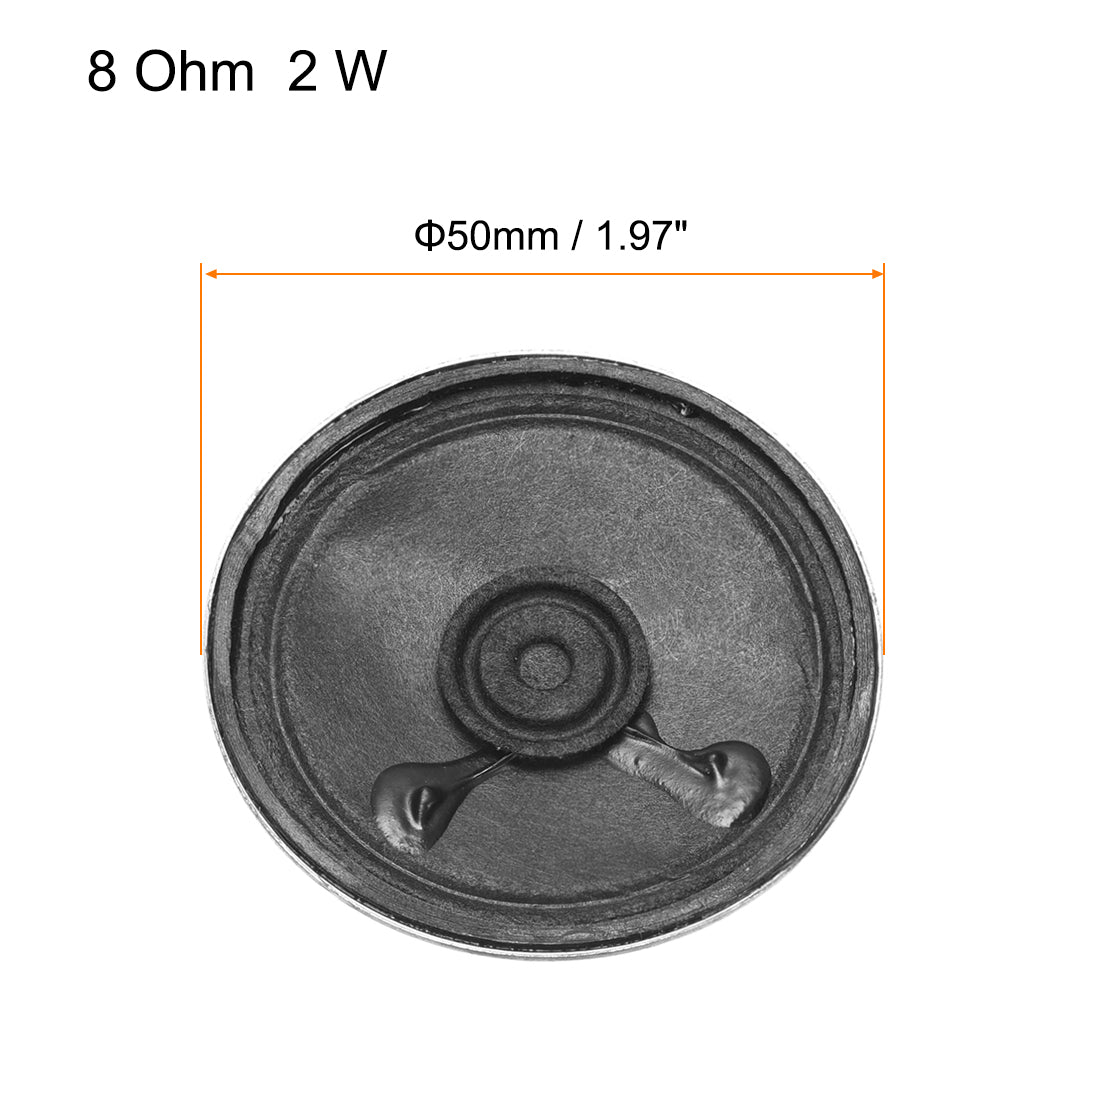 uxcell Uxcell 2W 8 Ohm DIY Magnetic Speaker 50mm Round Shape Replacement Loudspeaker for